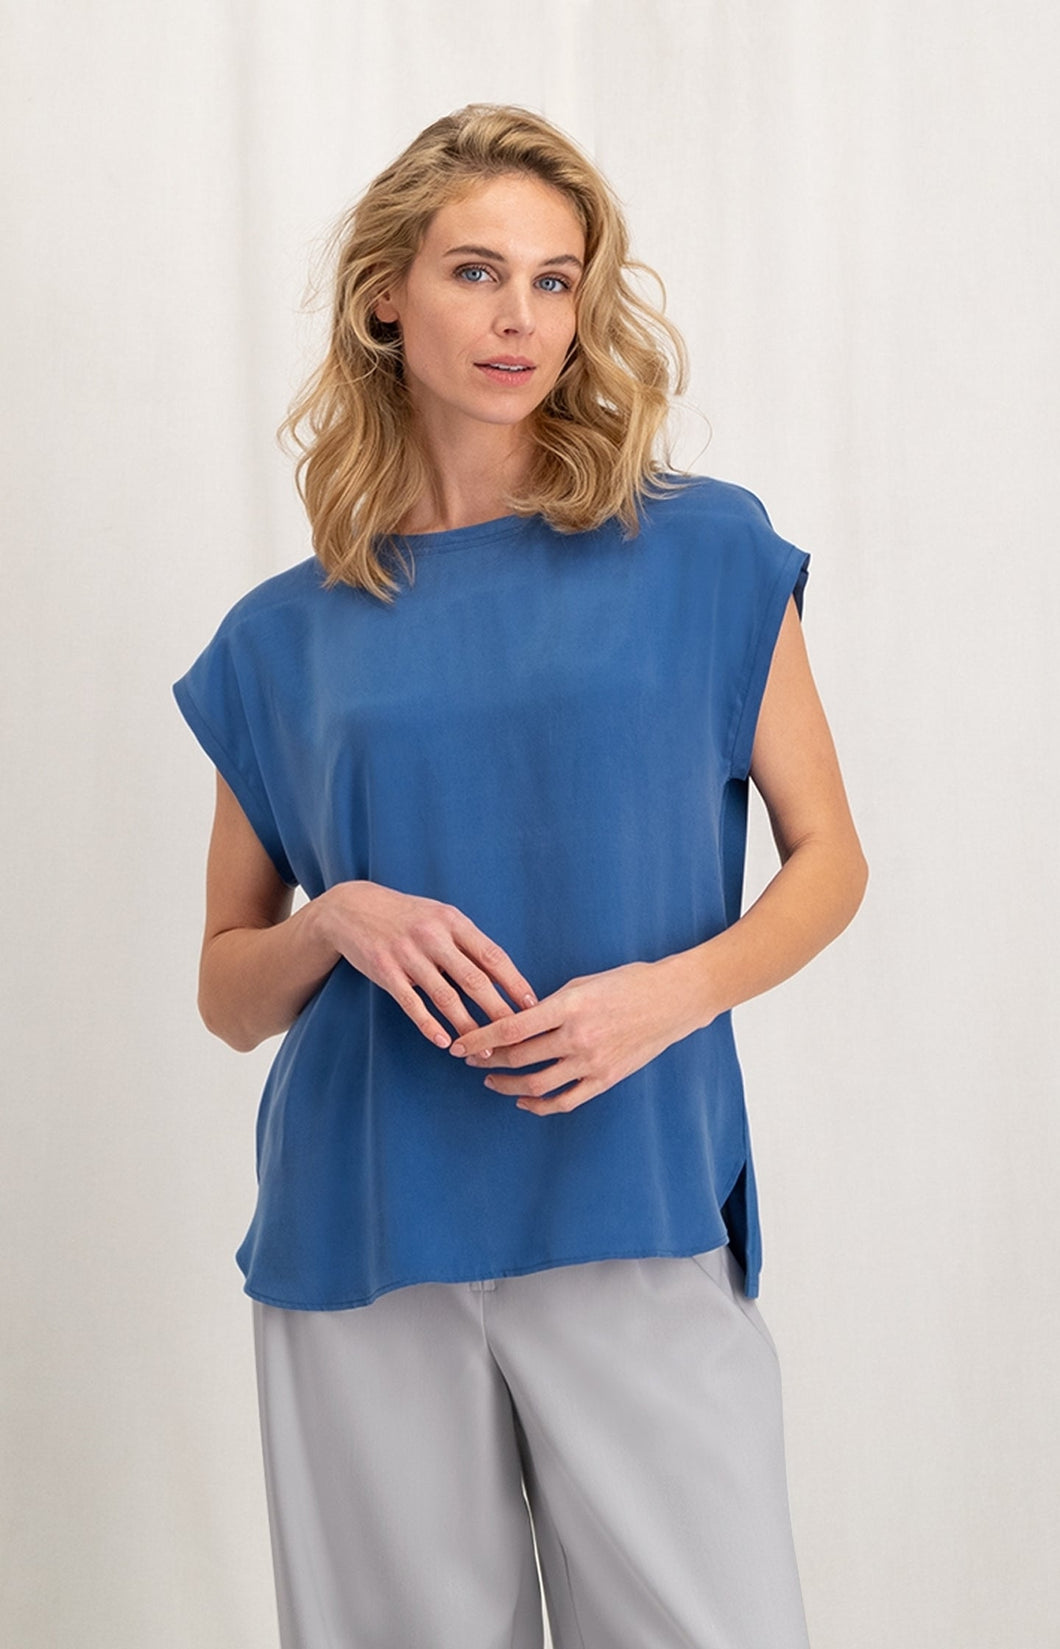 Sleeveless top with round neck in fabrix mix - Bright Cobalt Blue